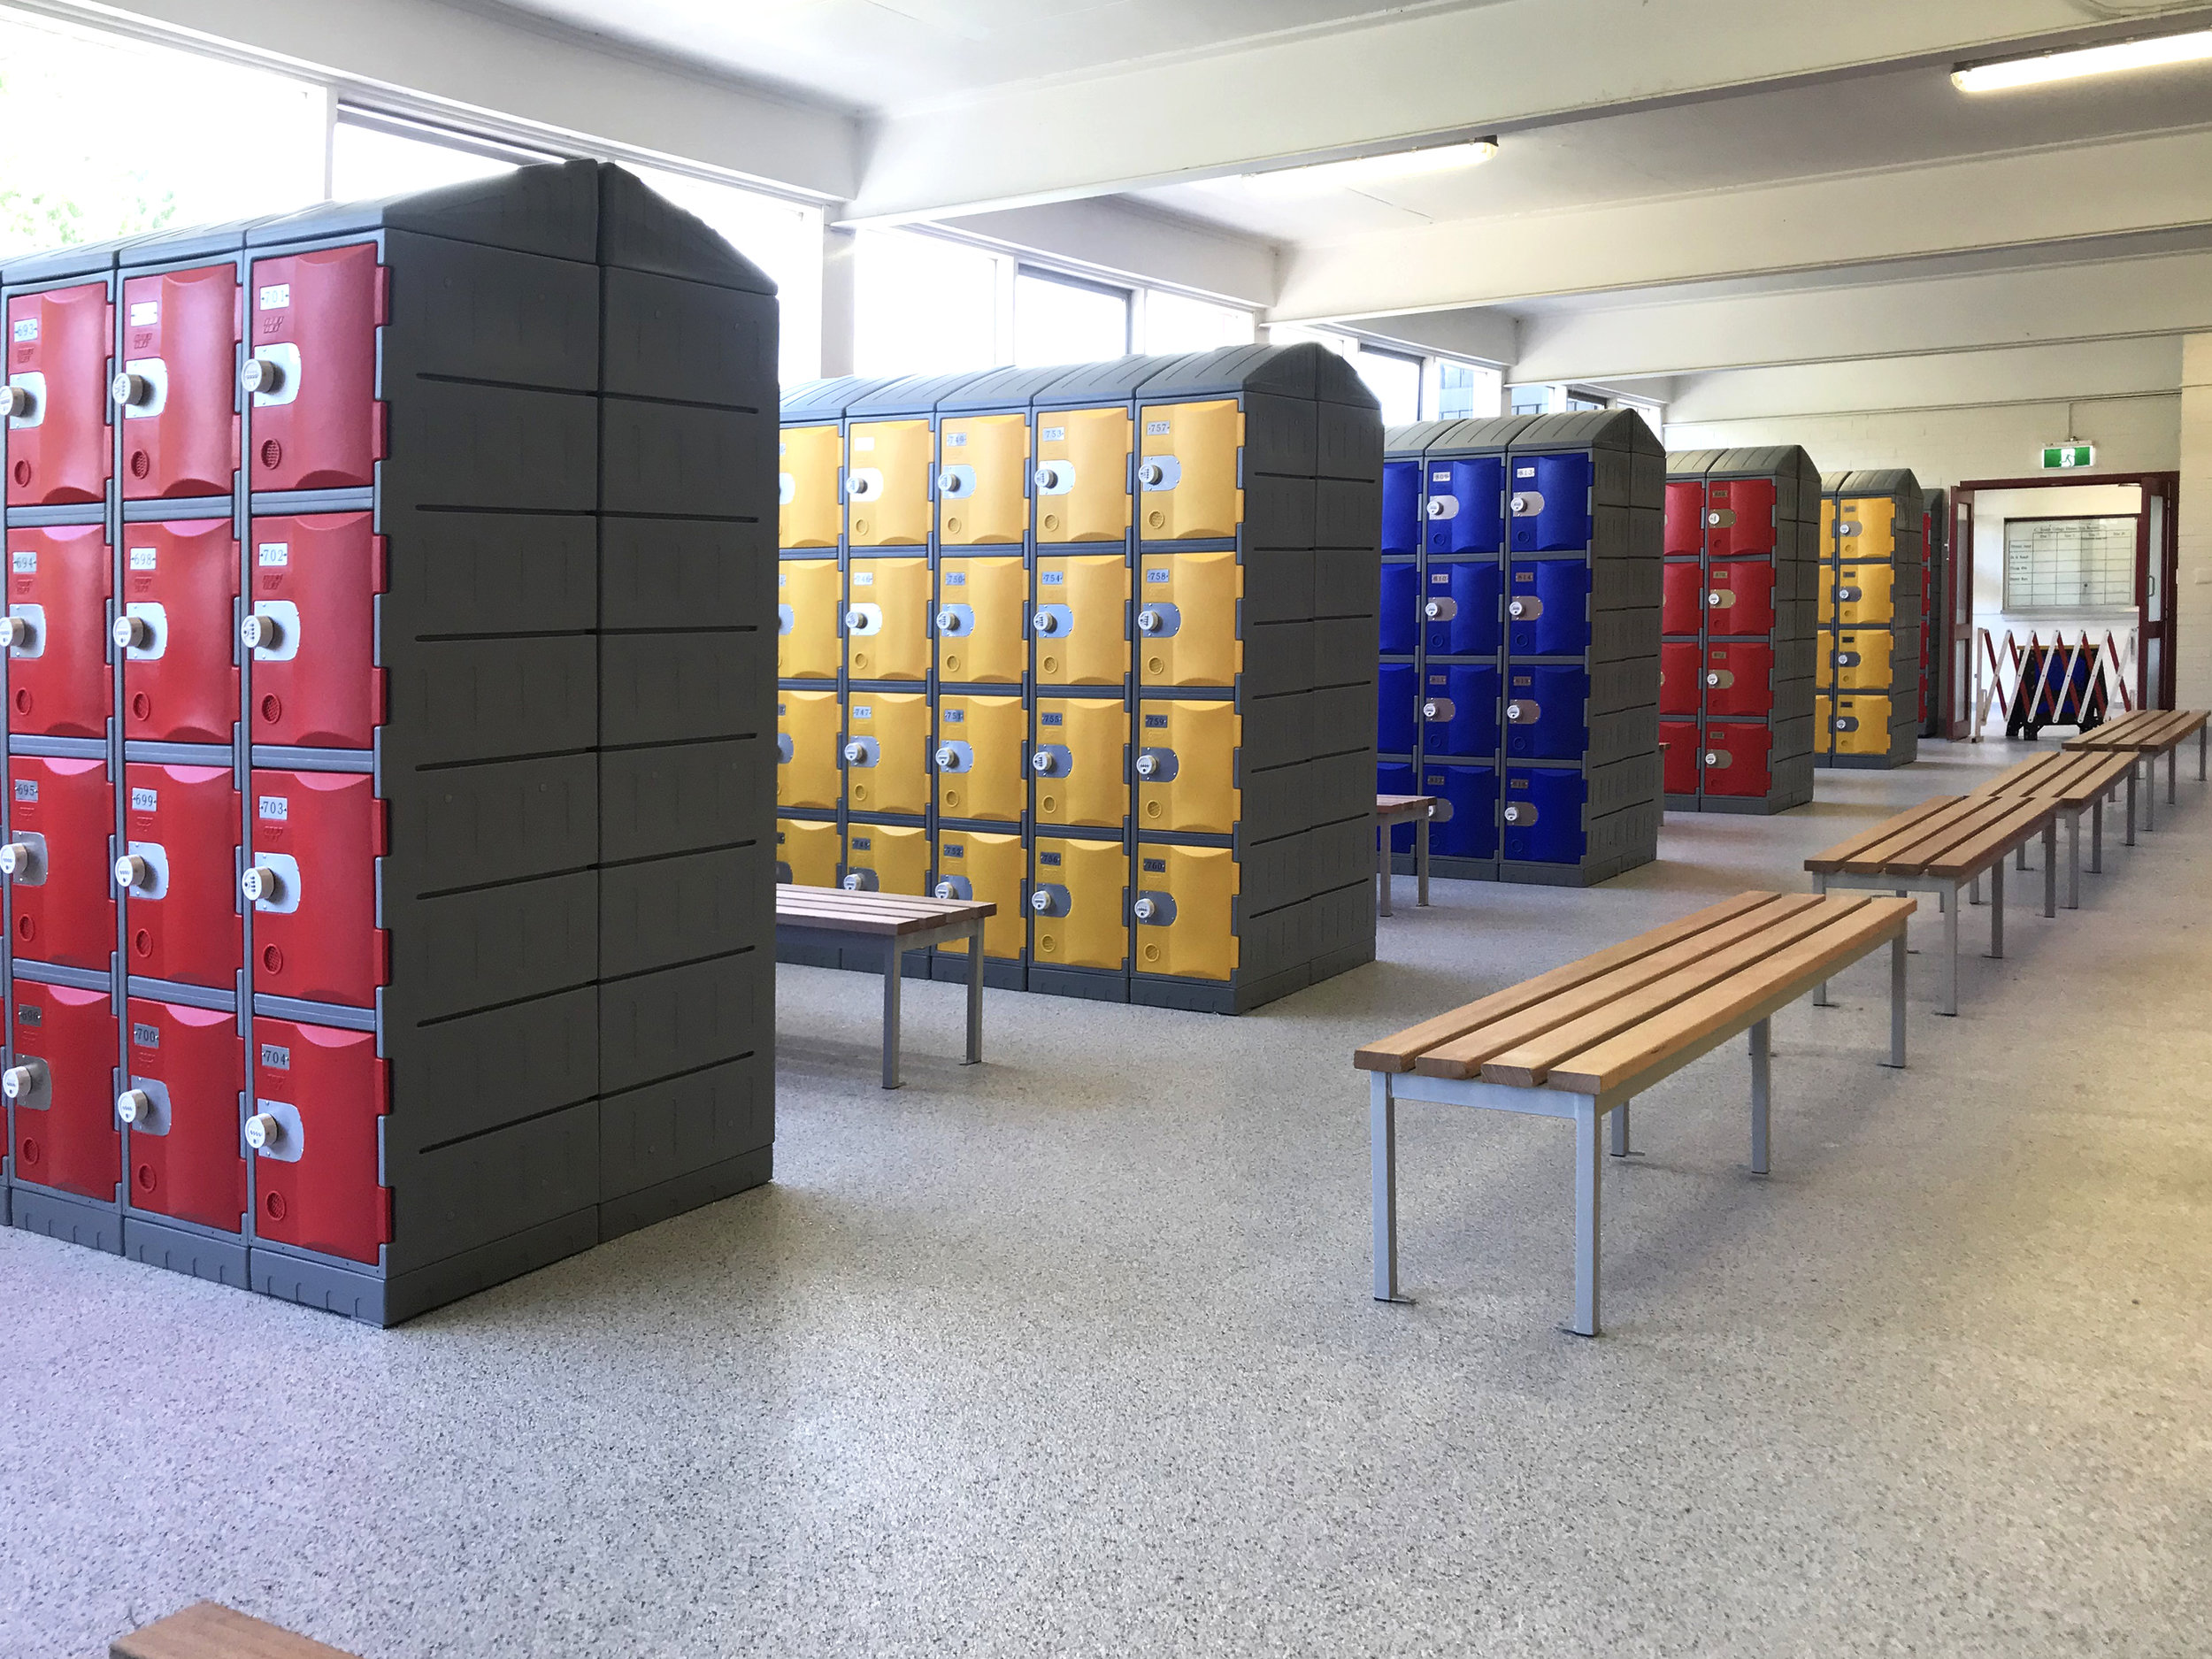 Red, yellow and blue heavy duty plastic lockers.